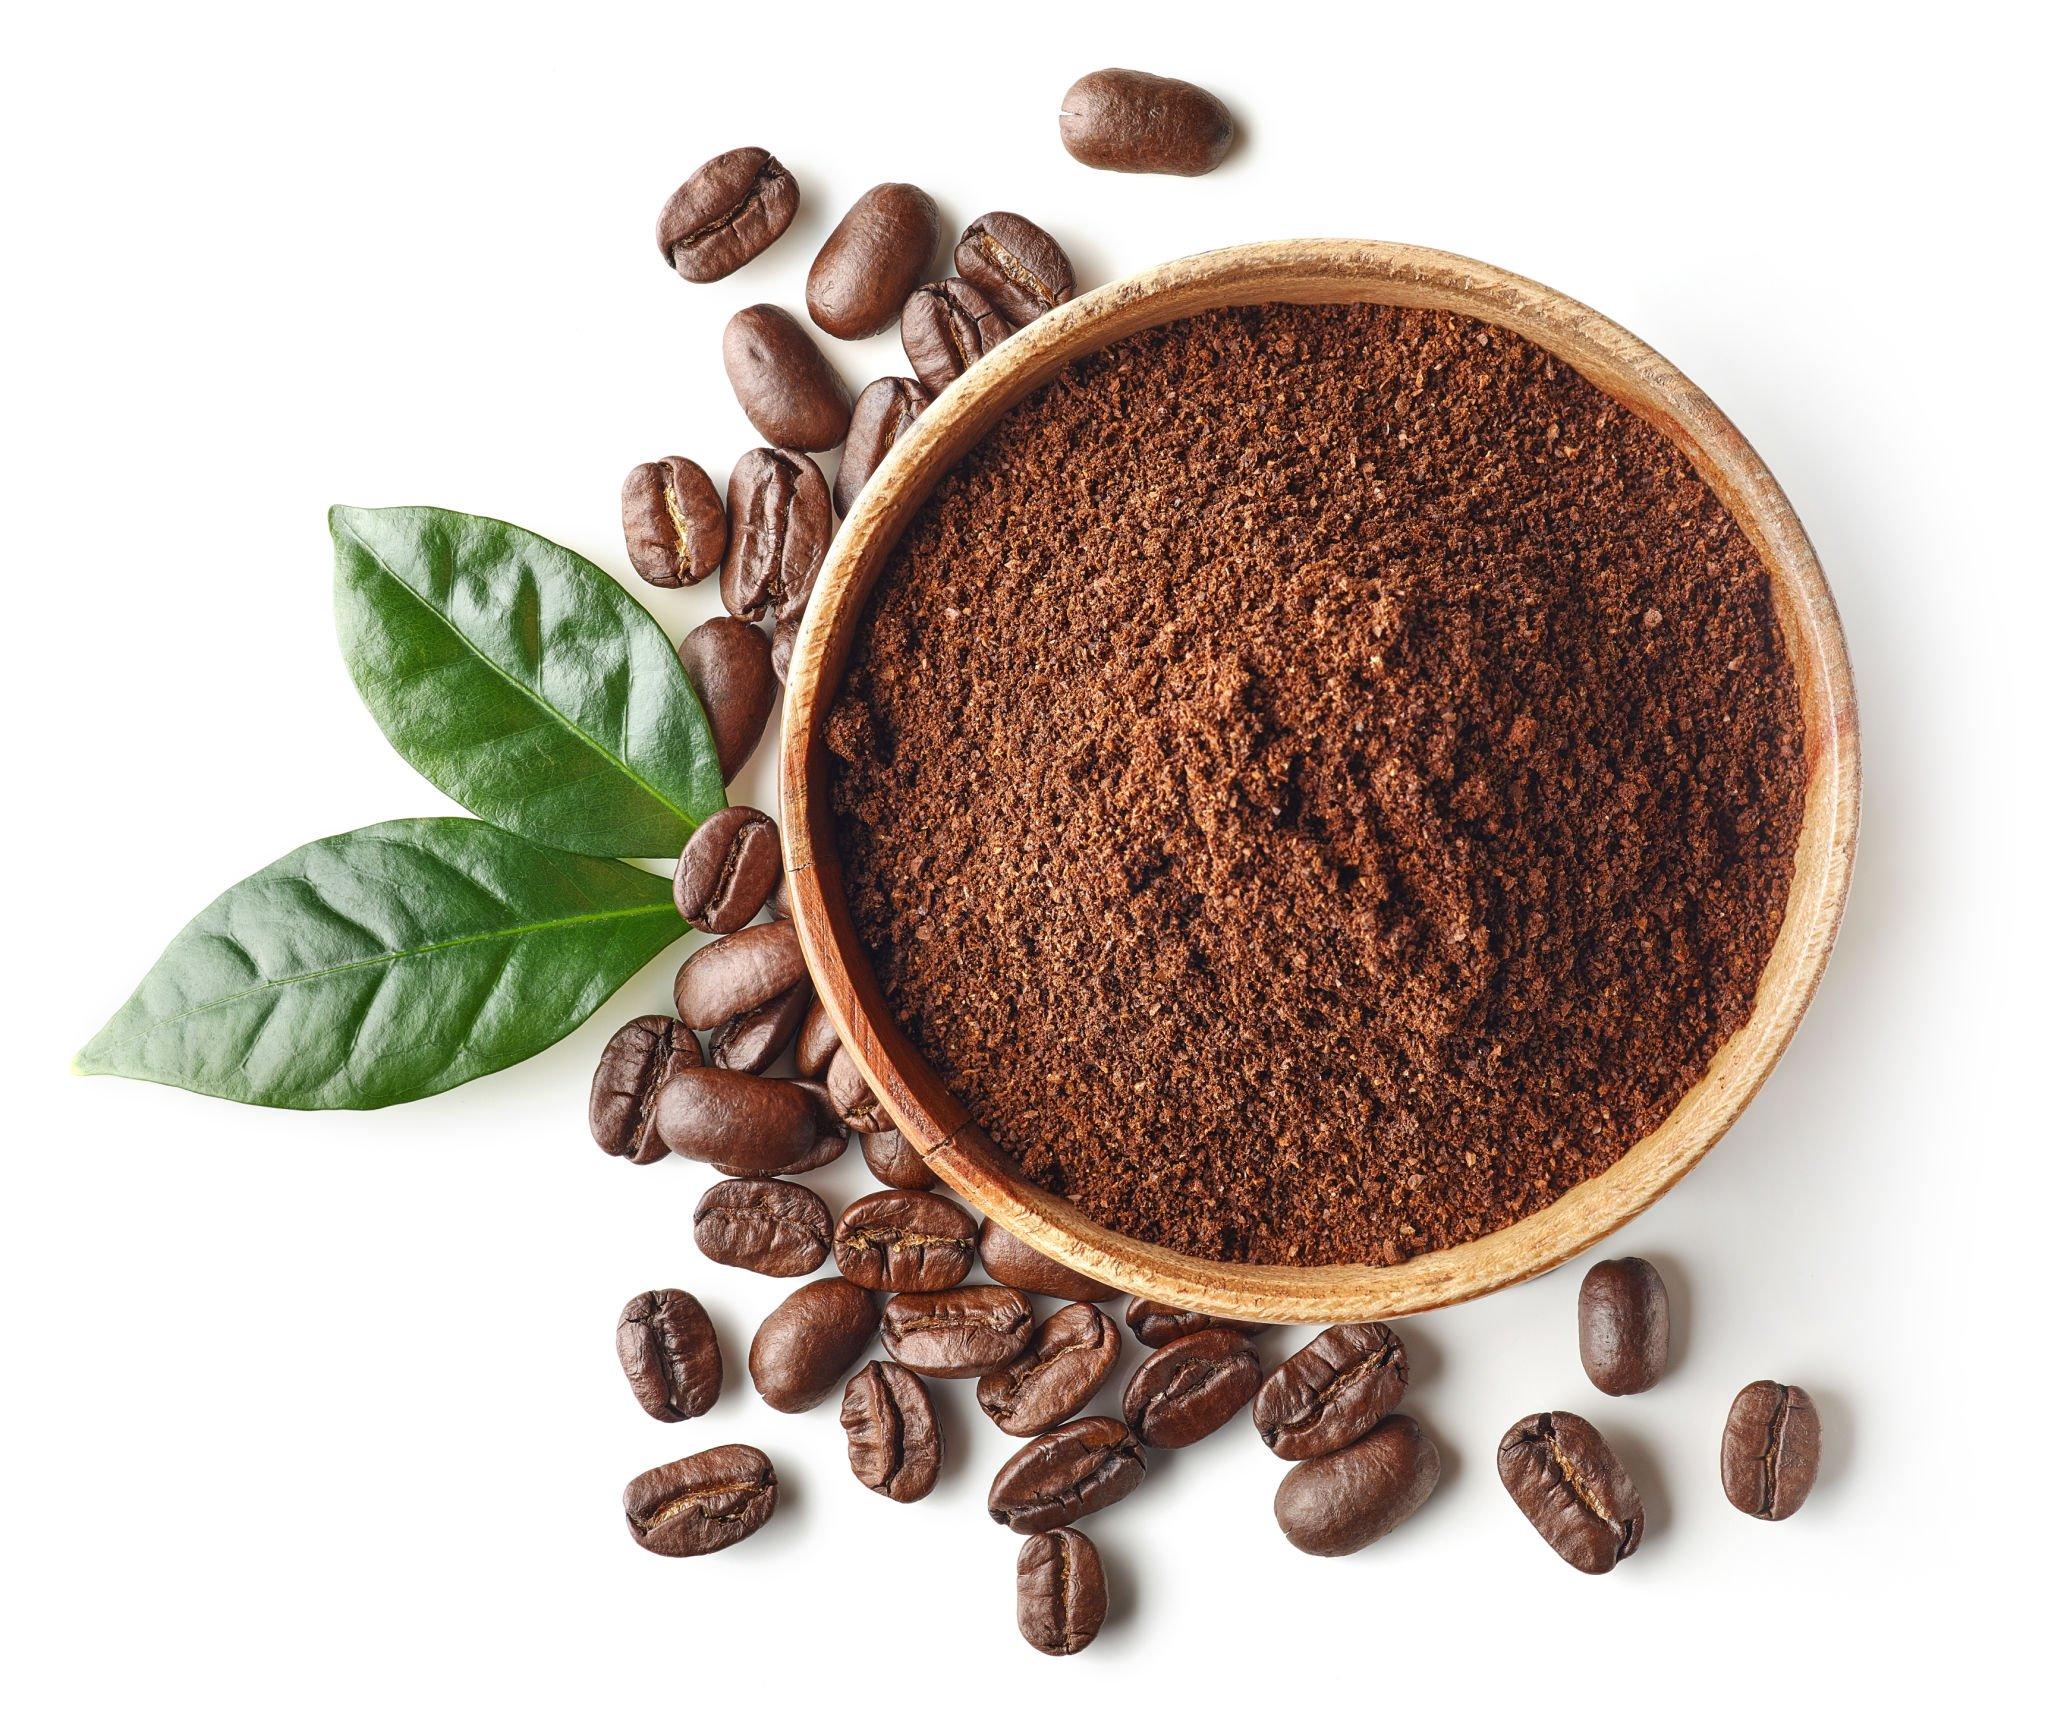 Why Coffee Grounds Are Good For Plants